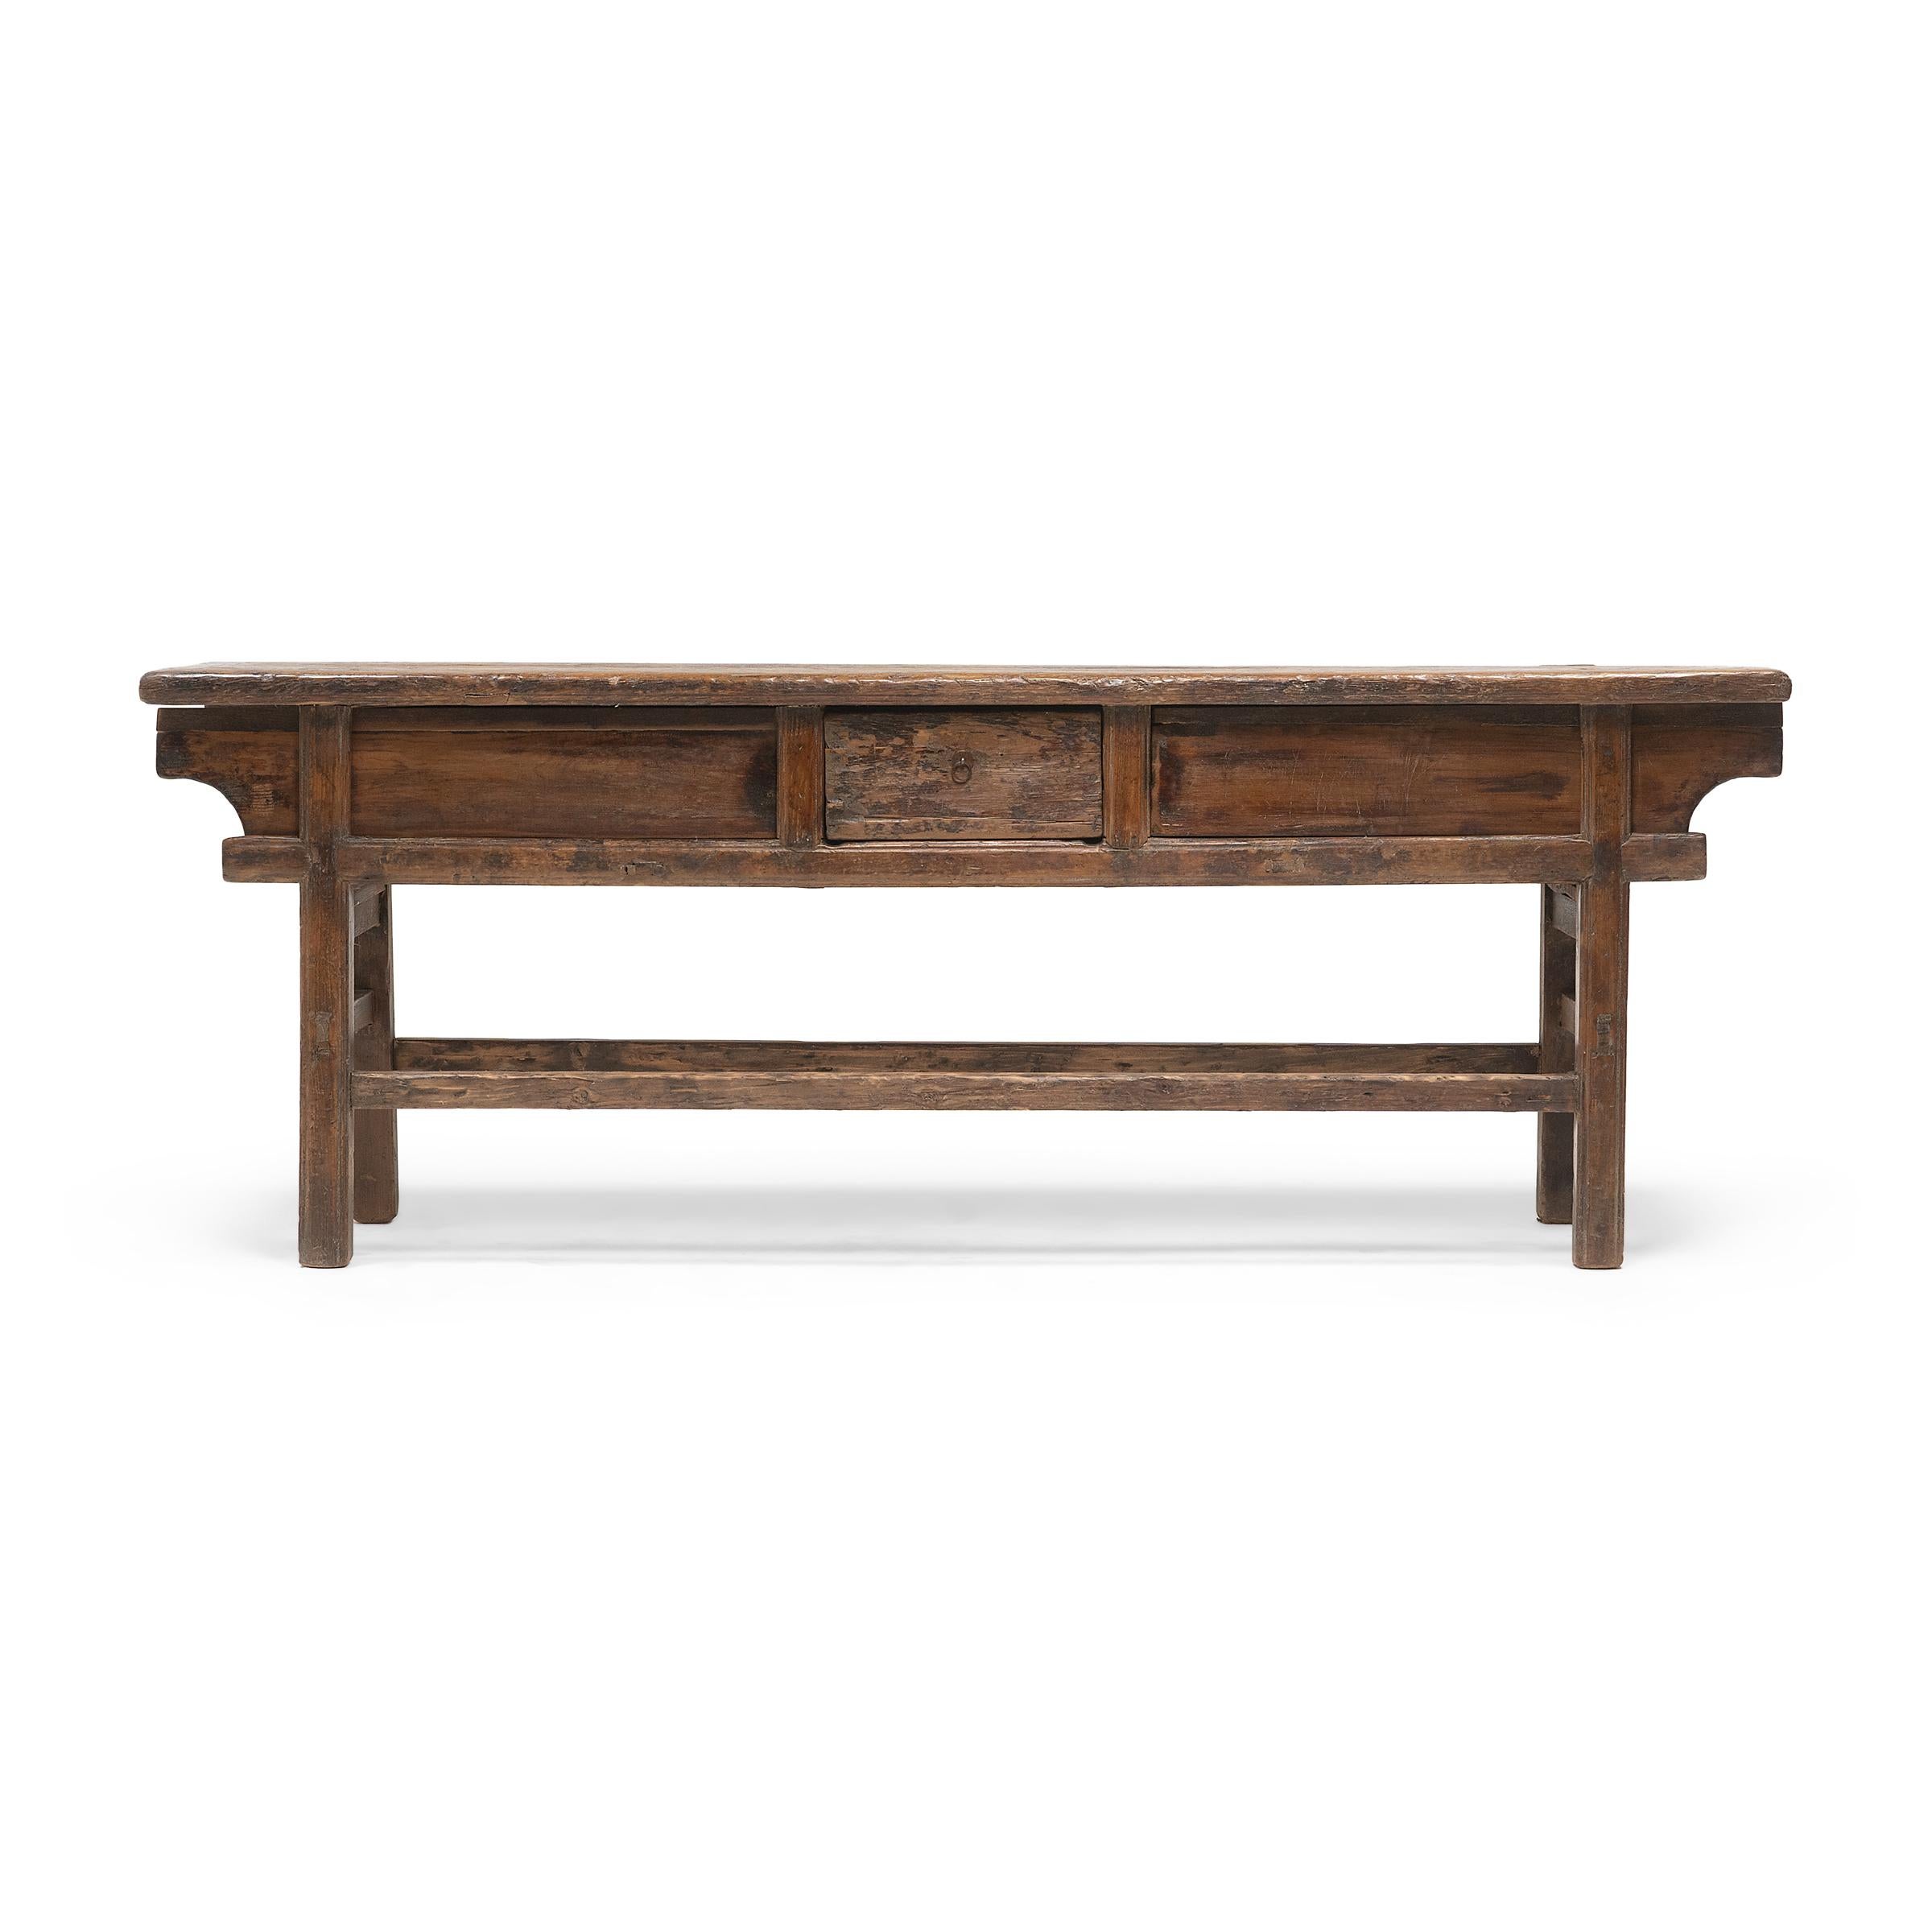 The warm tones and active grain of natural pine wood are the focus of this unusually articulated buffet. Made for a provincial home in northeastern China, this buffet was once used to honor loved ones past and present with photos or other prized